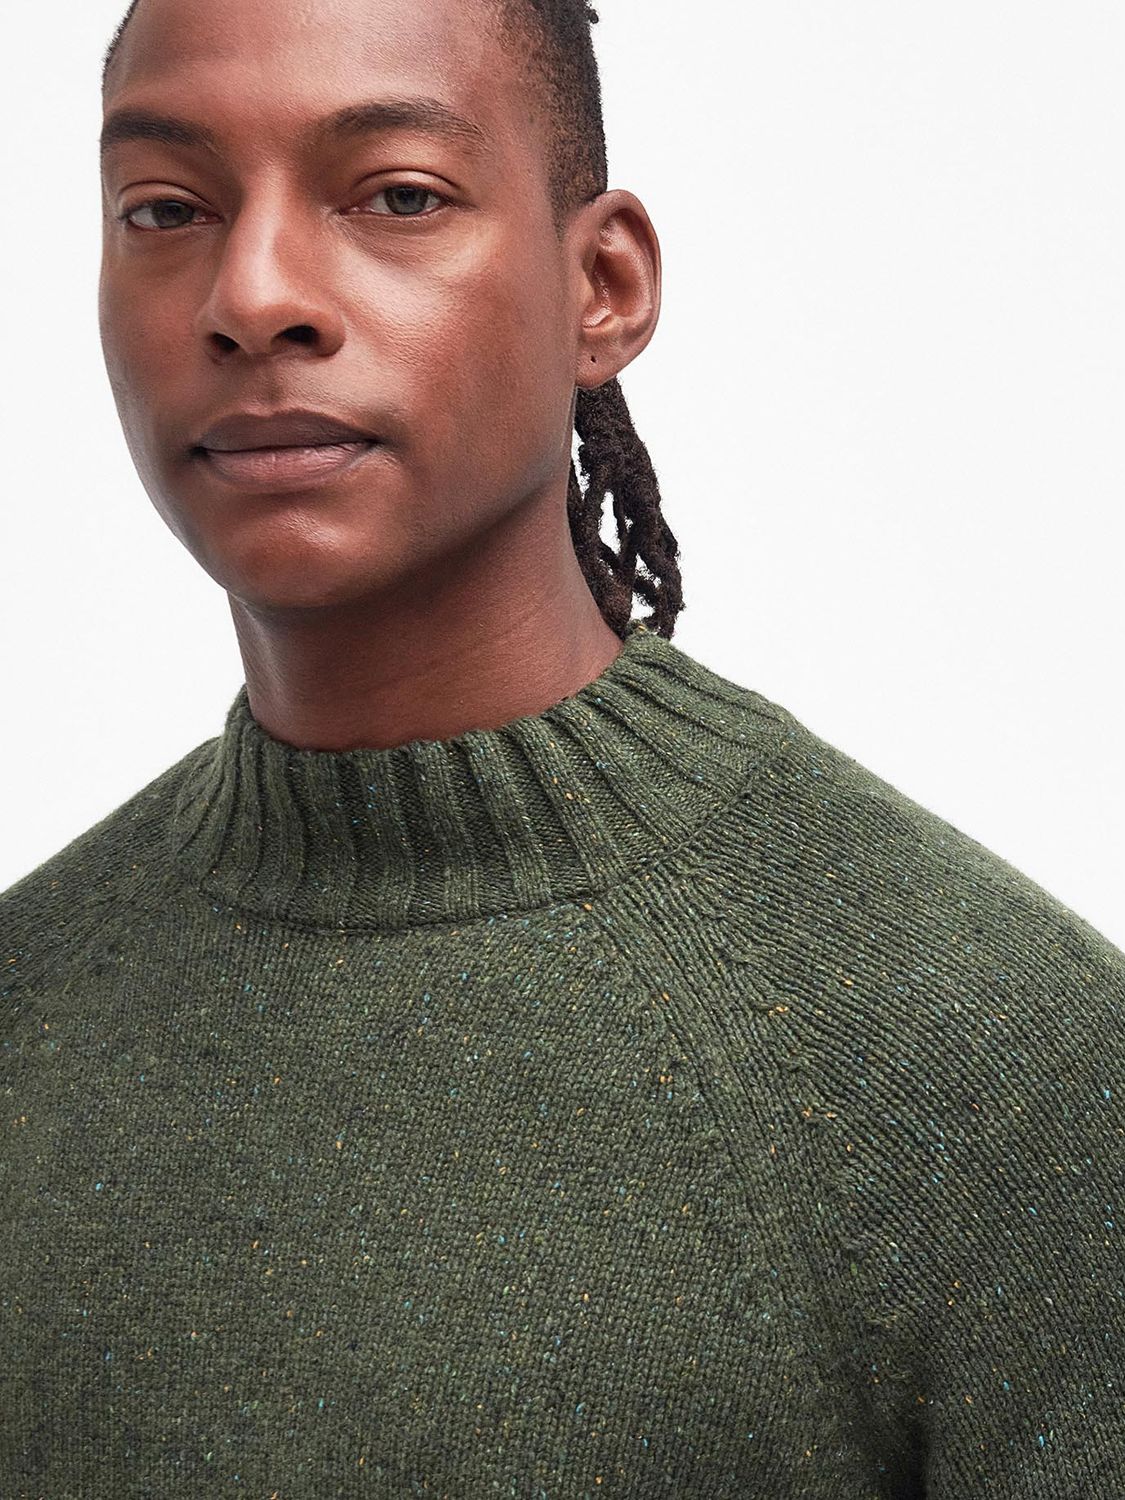 Barbour Tomorrow's Archive Mac Knitted Jumper, Green at John Lewis ...